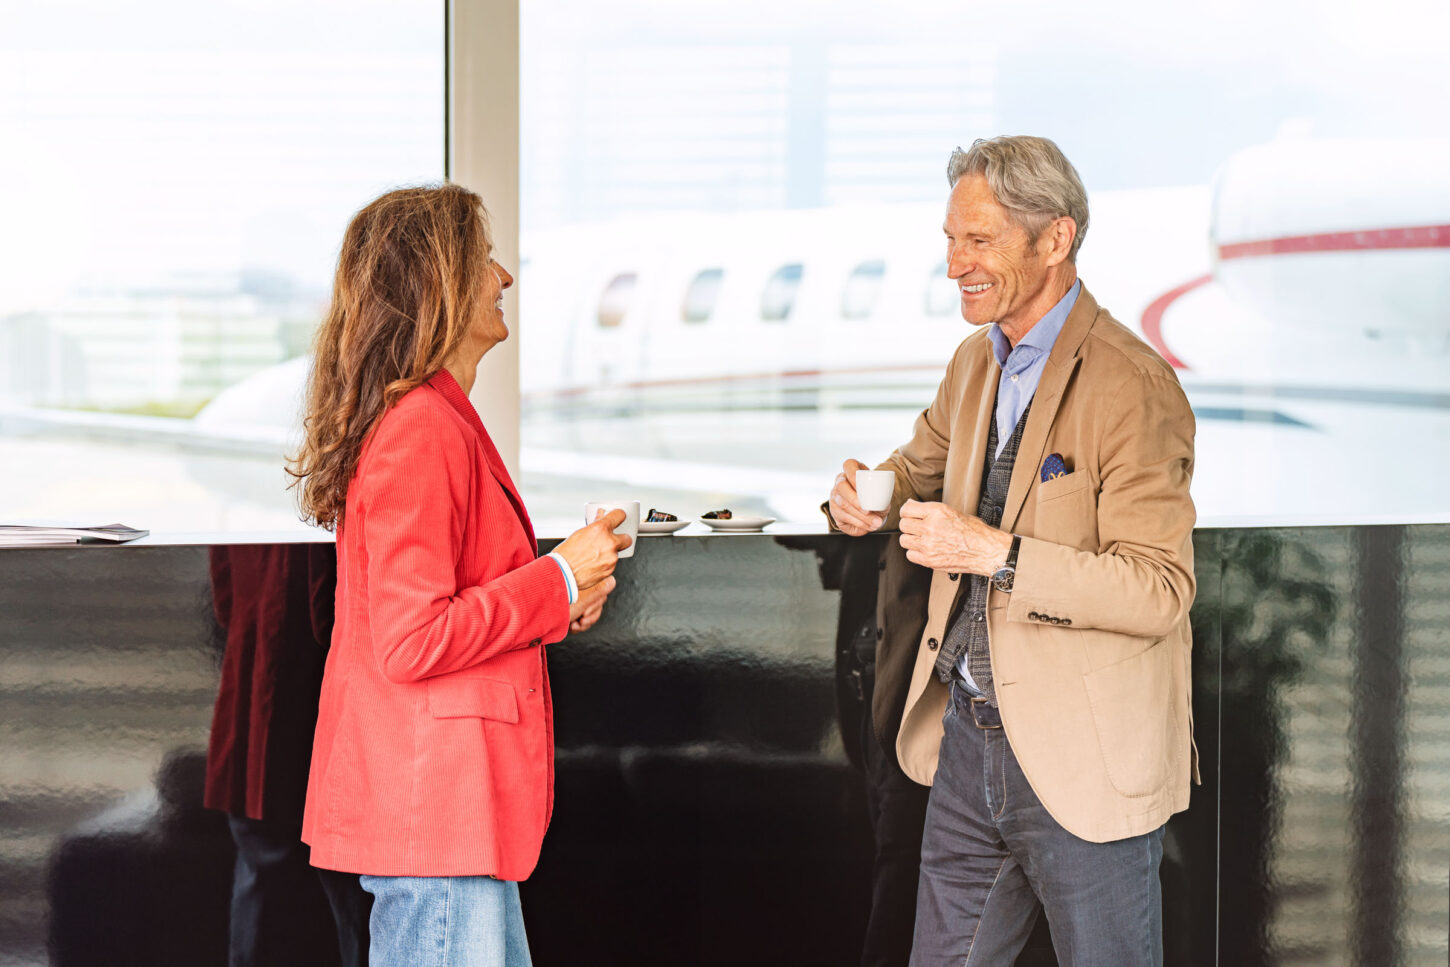 couple having coffee standing in an airport terminal, parked aircraft in the background